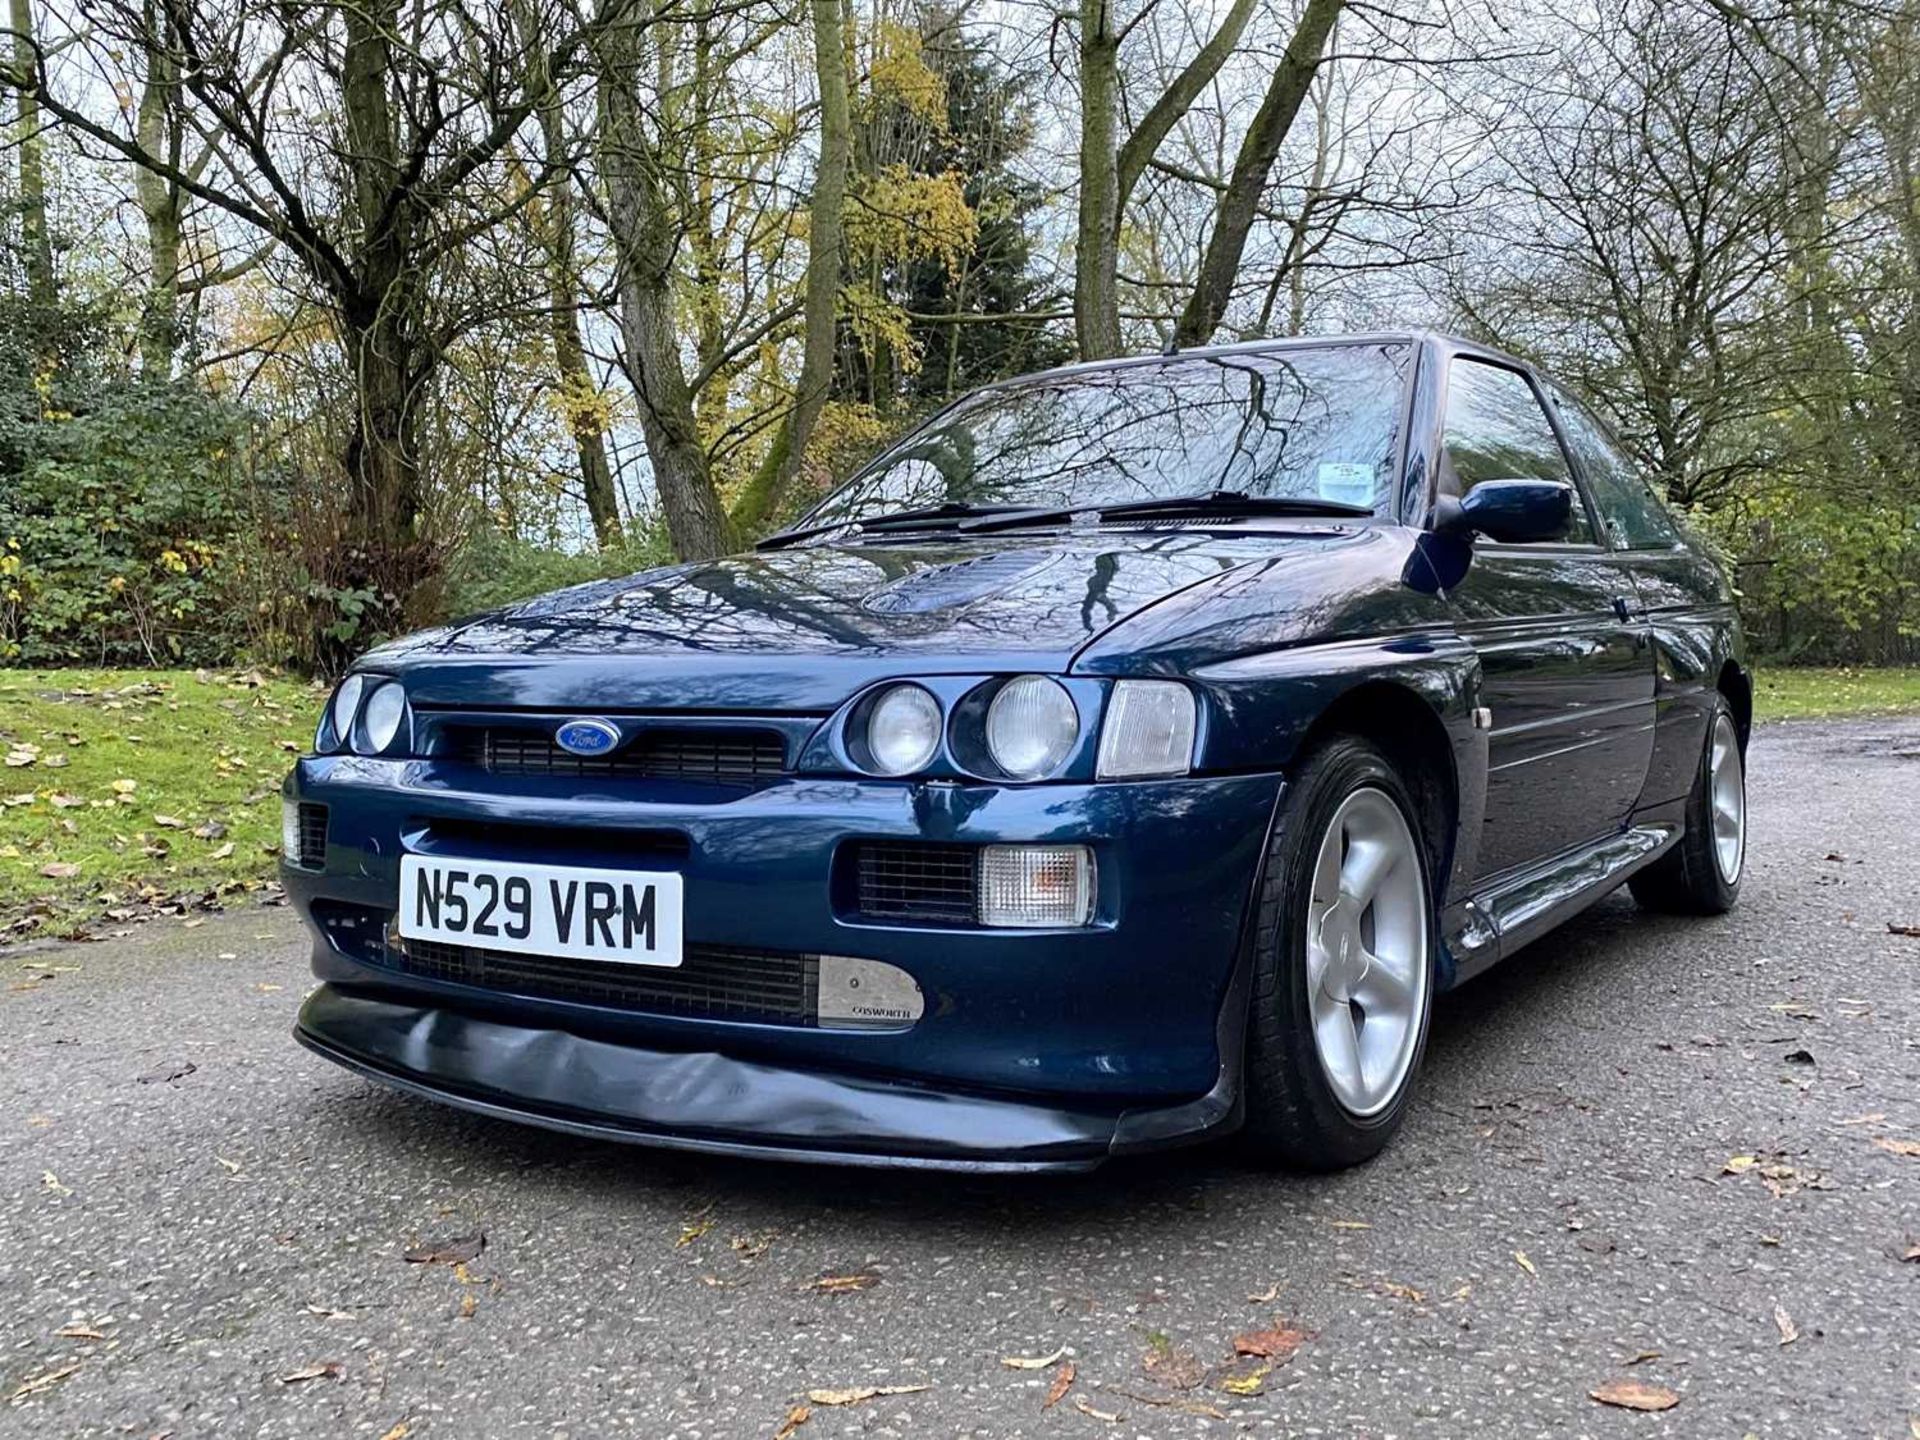 1995 Ford Escort RS Cosworth LUX Only 56,000 miles, finished in rare Petrol Blue - Image 2 of 98